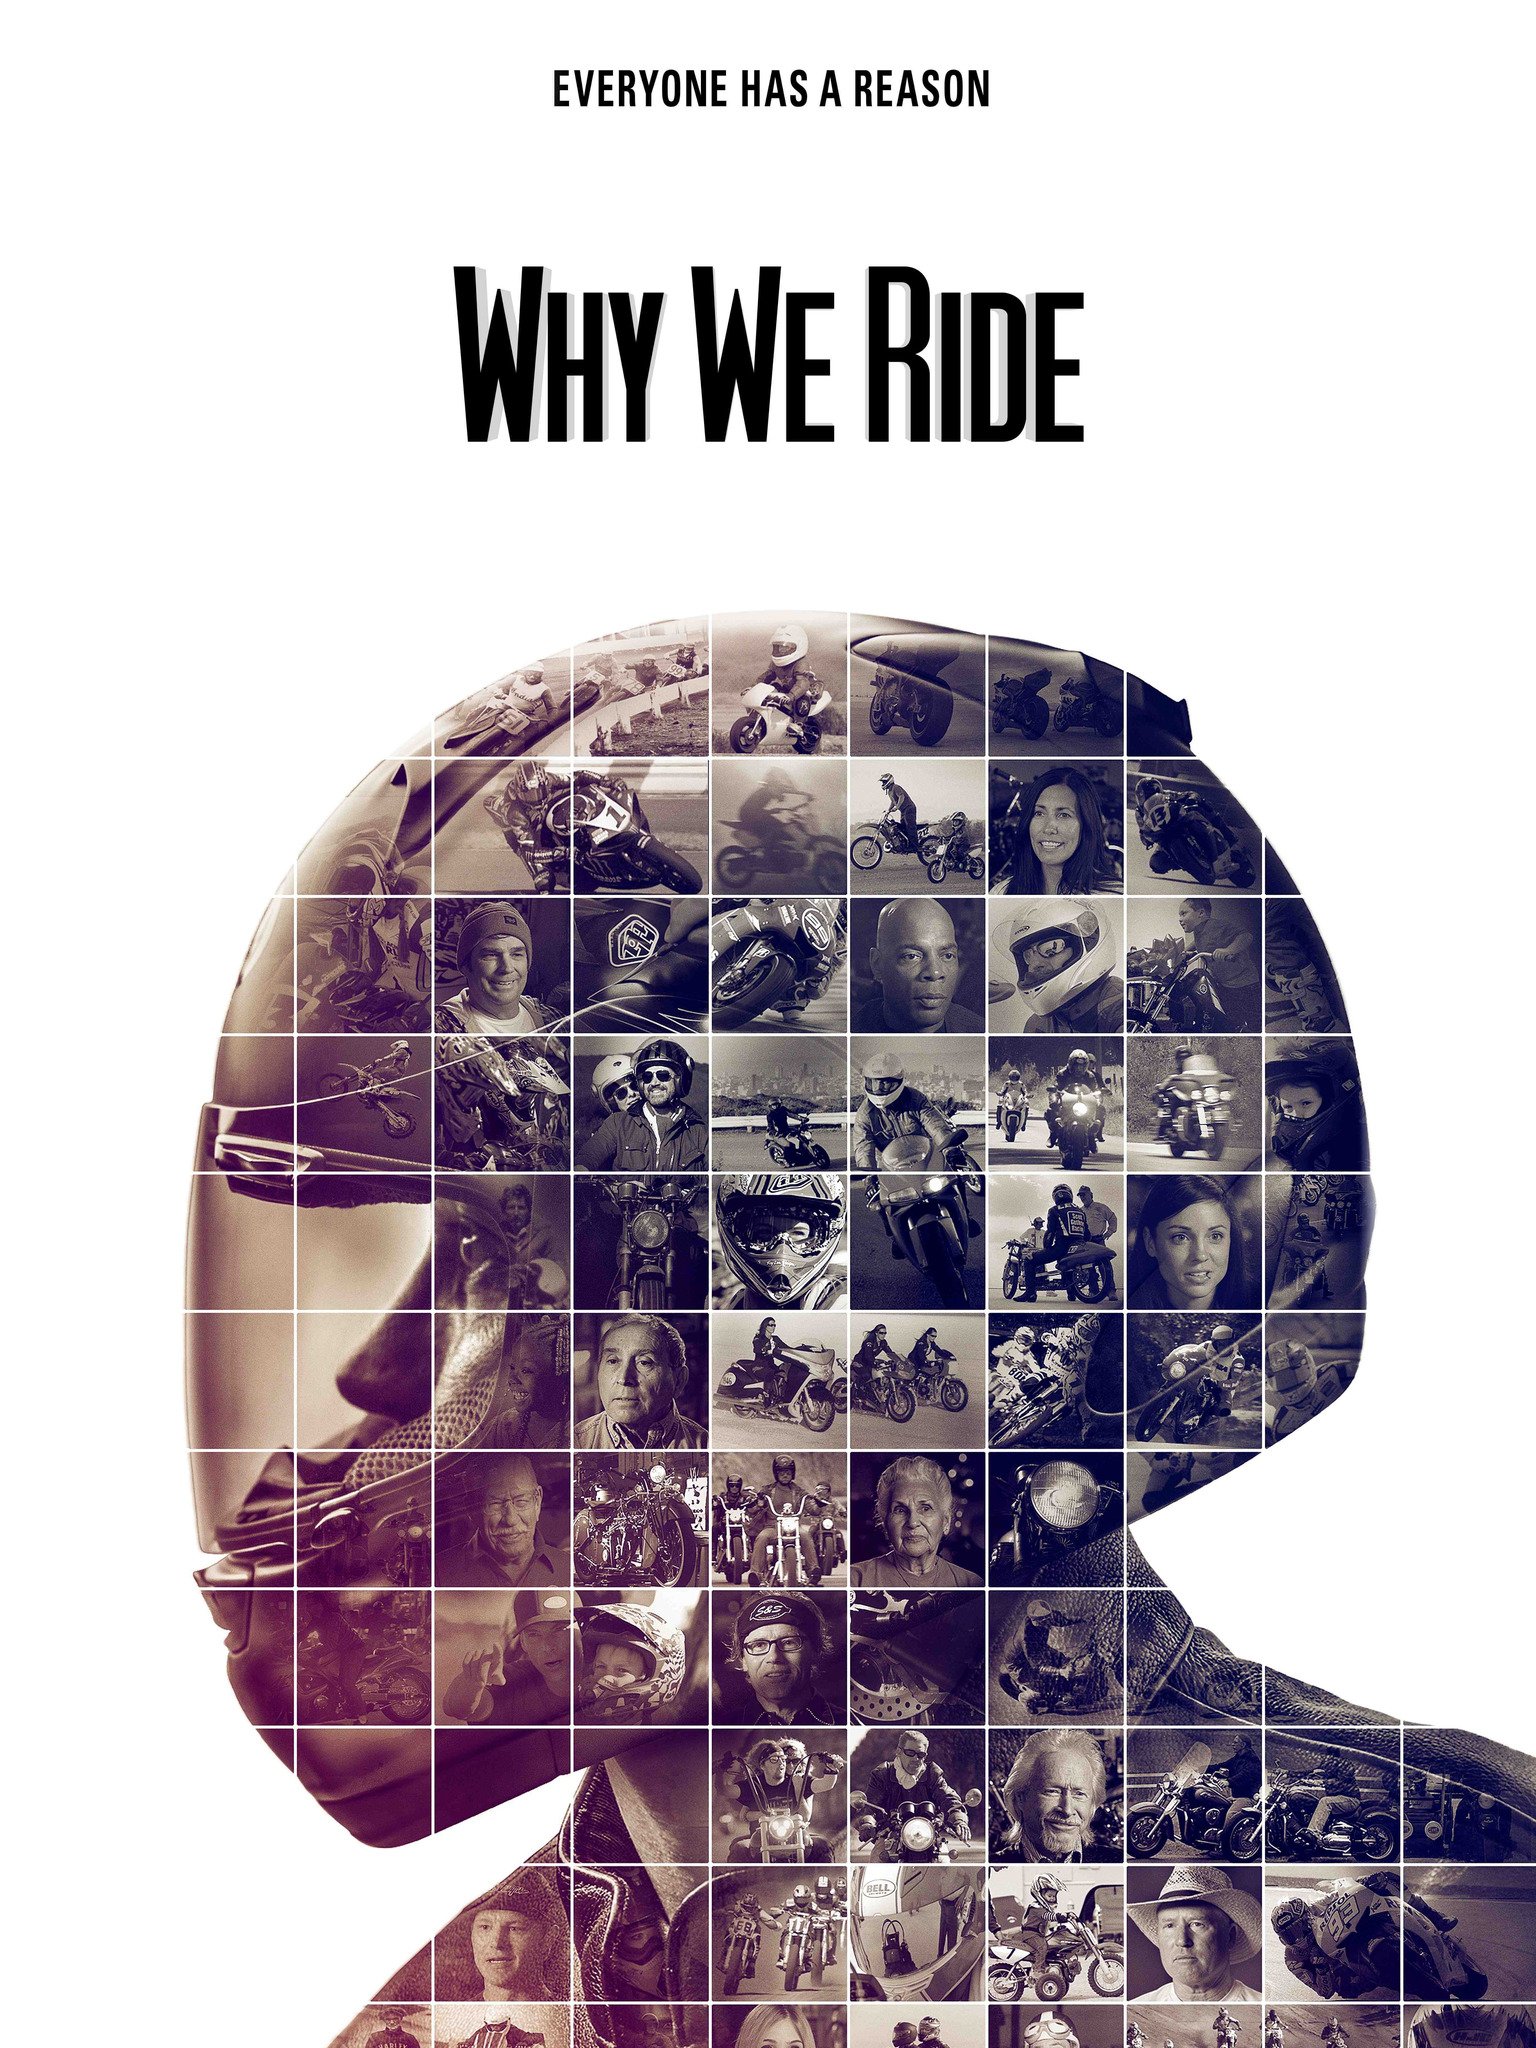 Why We Ride 2013 Rotten Tomatoes